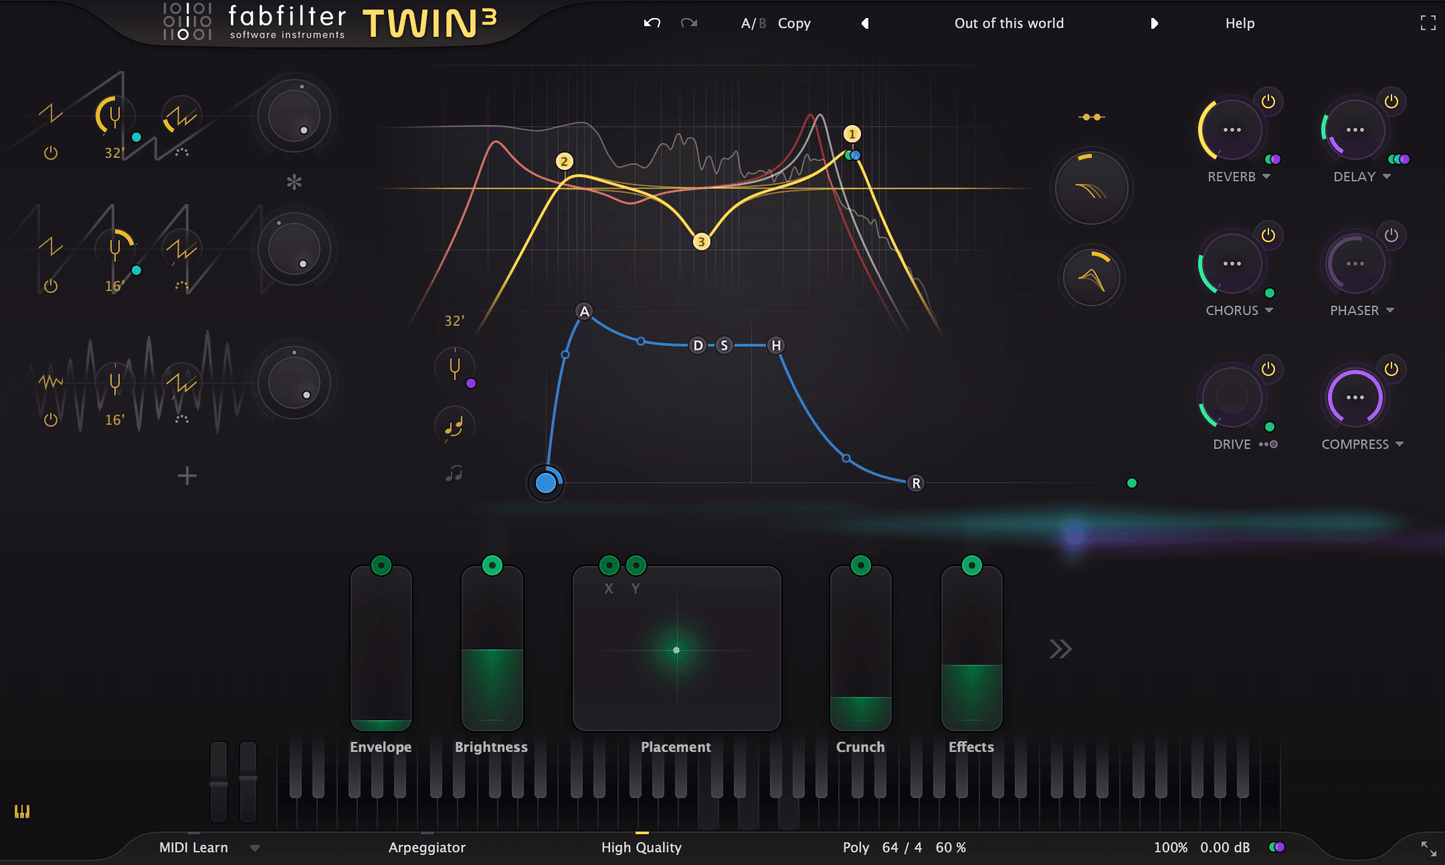 FabFilter twin 3 gui for AU and VST supported plugins